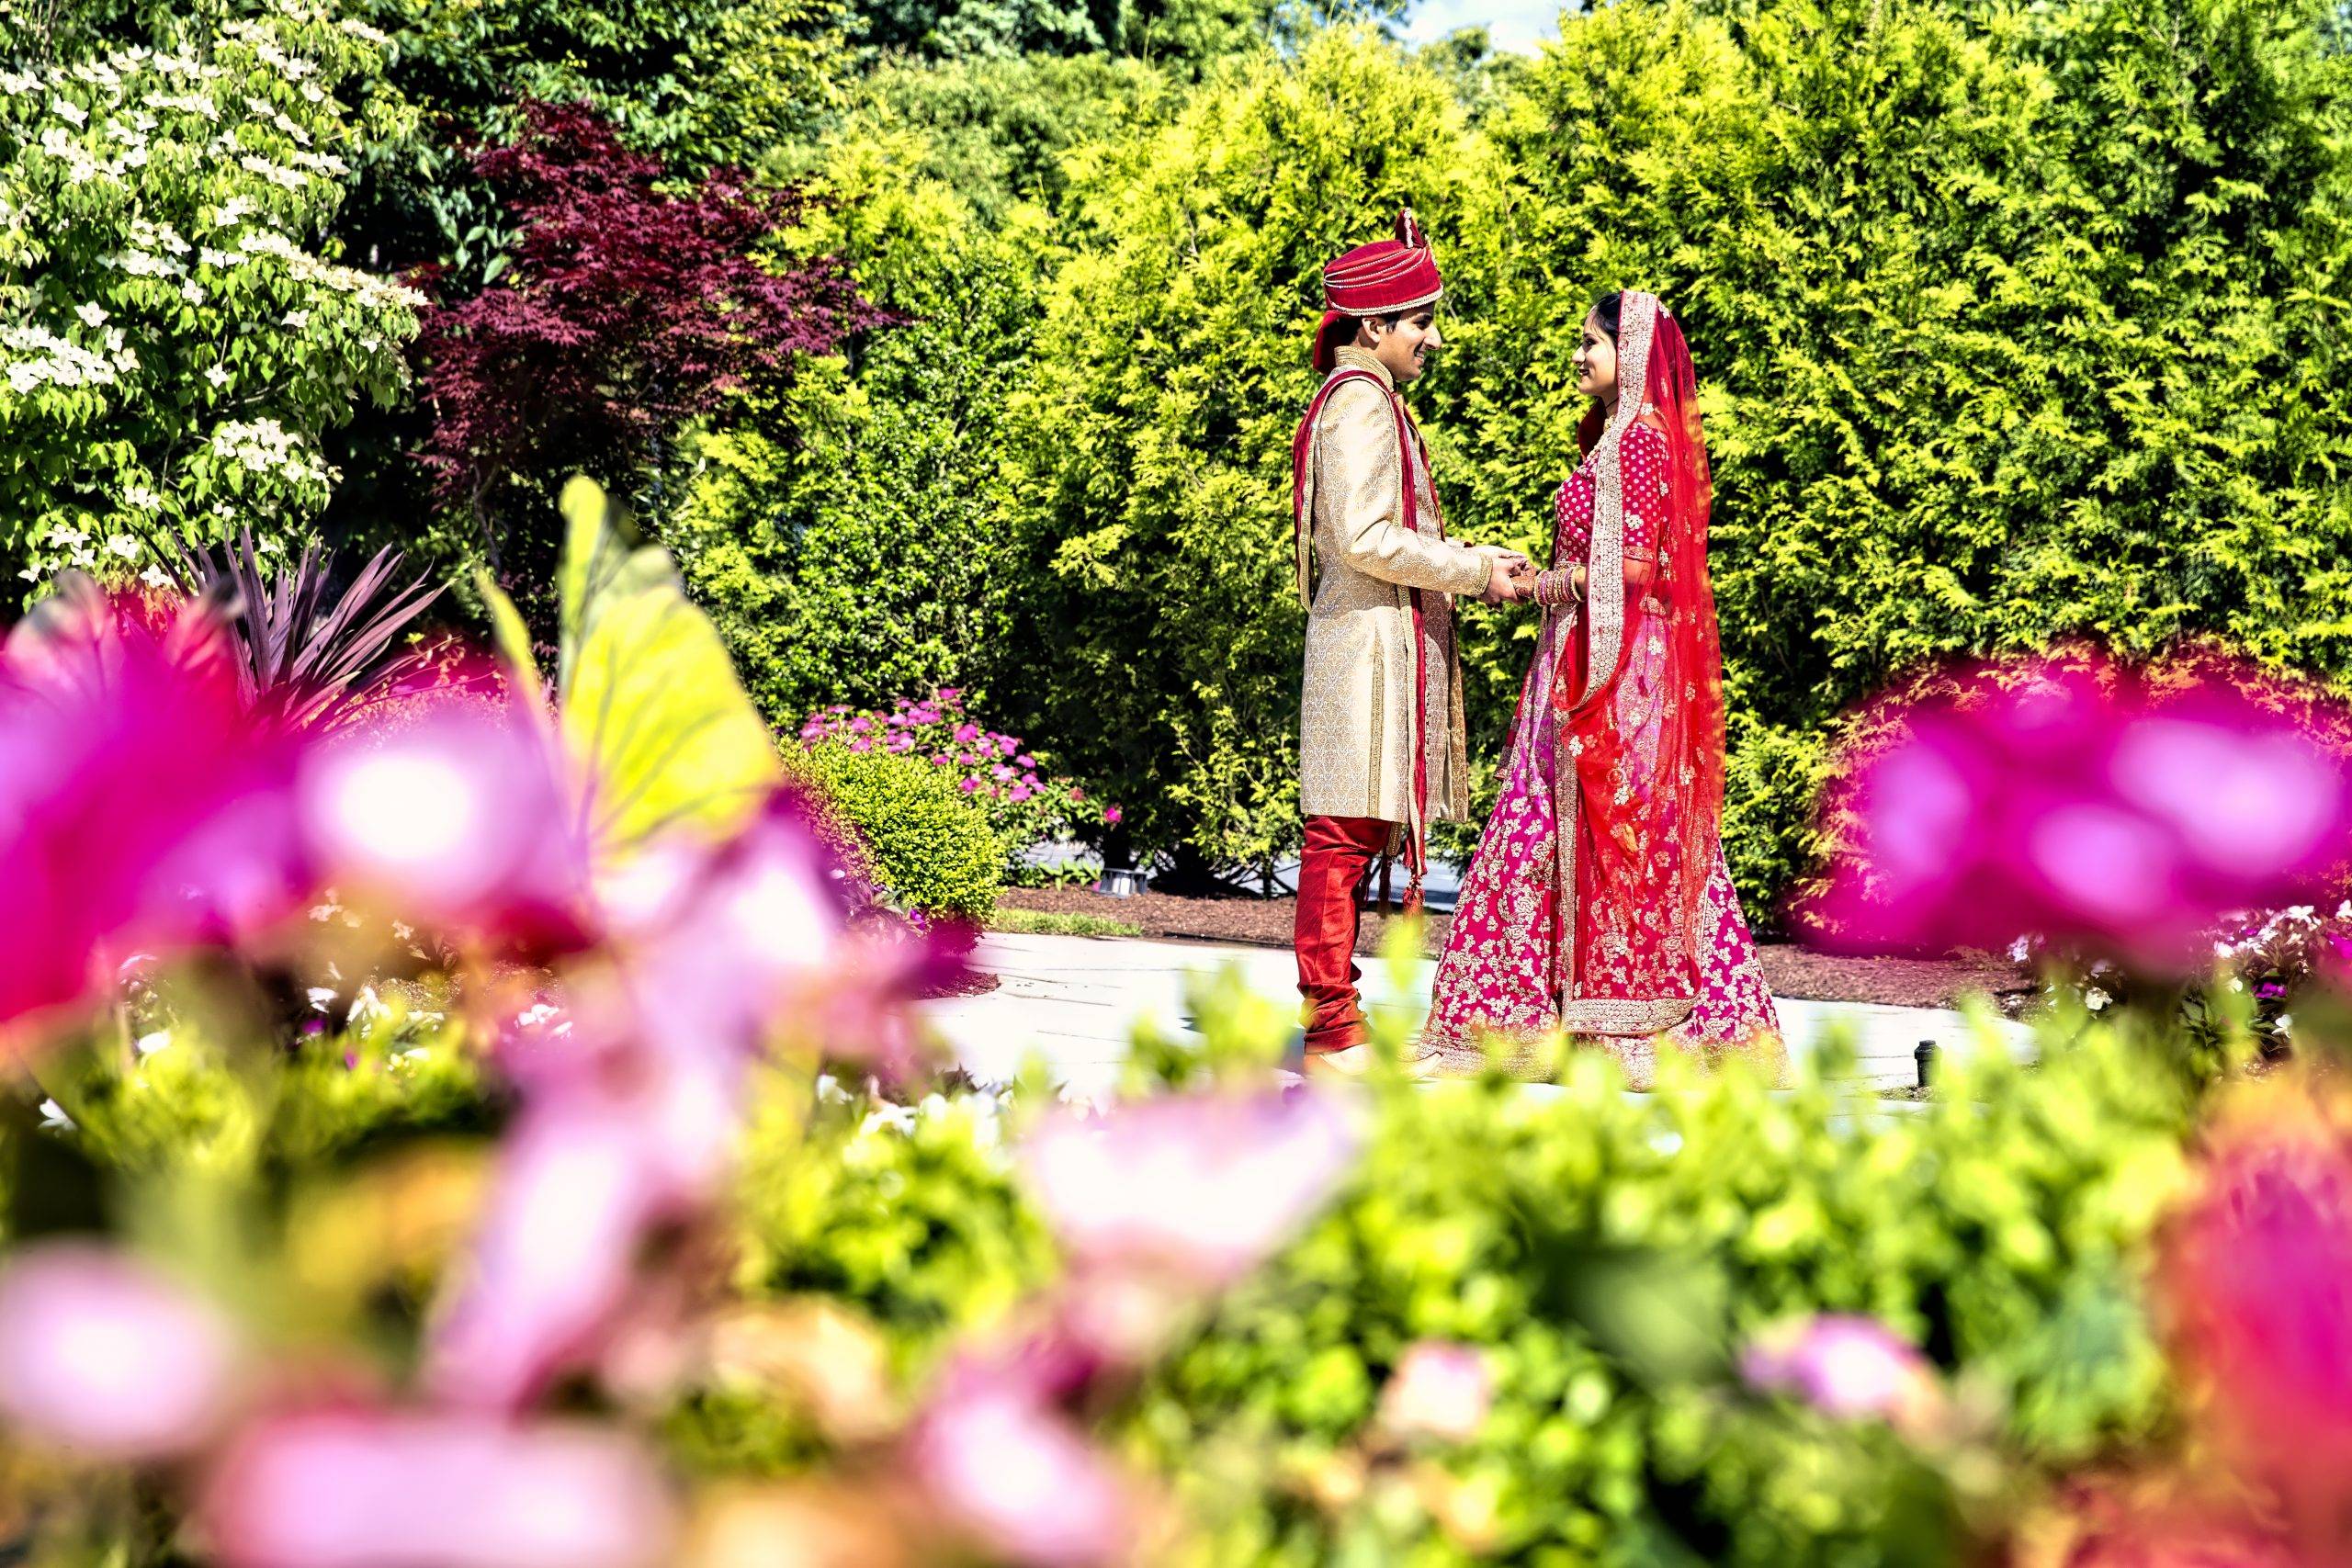 A bride and groom standing in a garden with flowers.